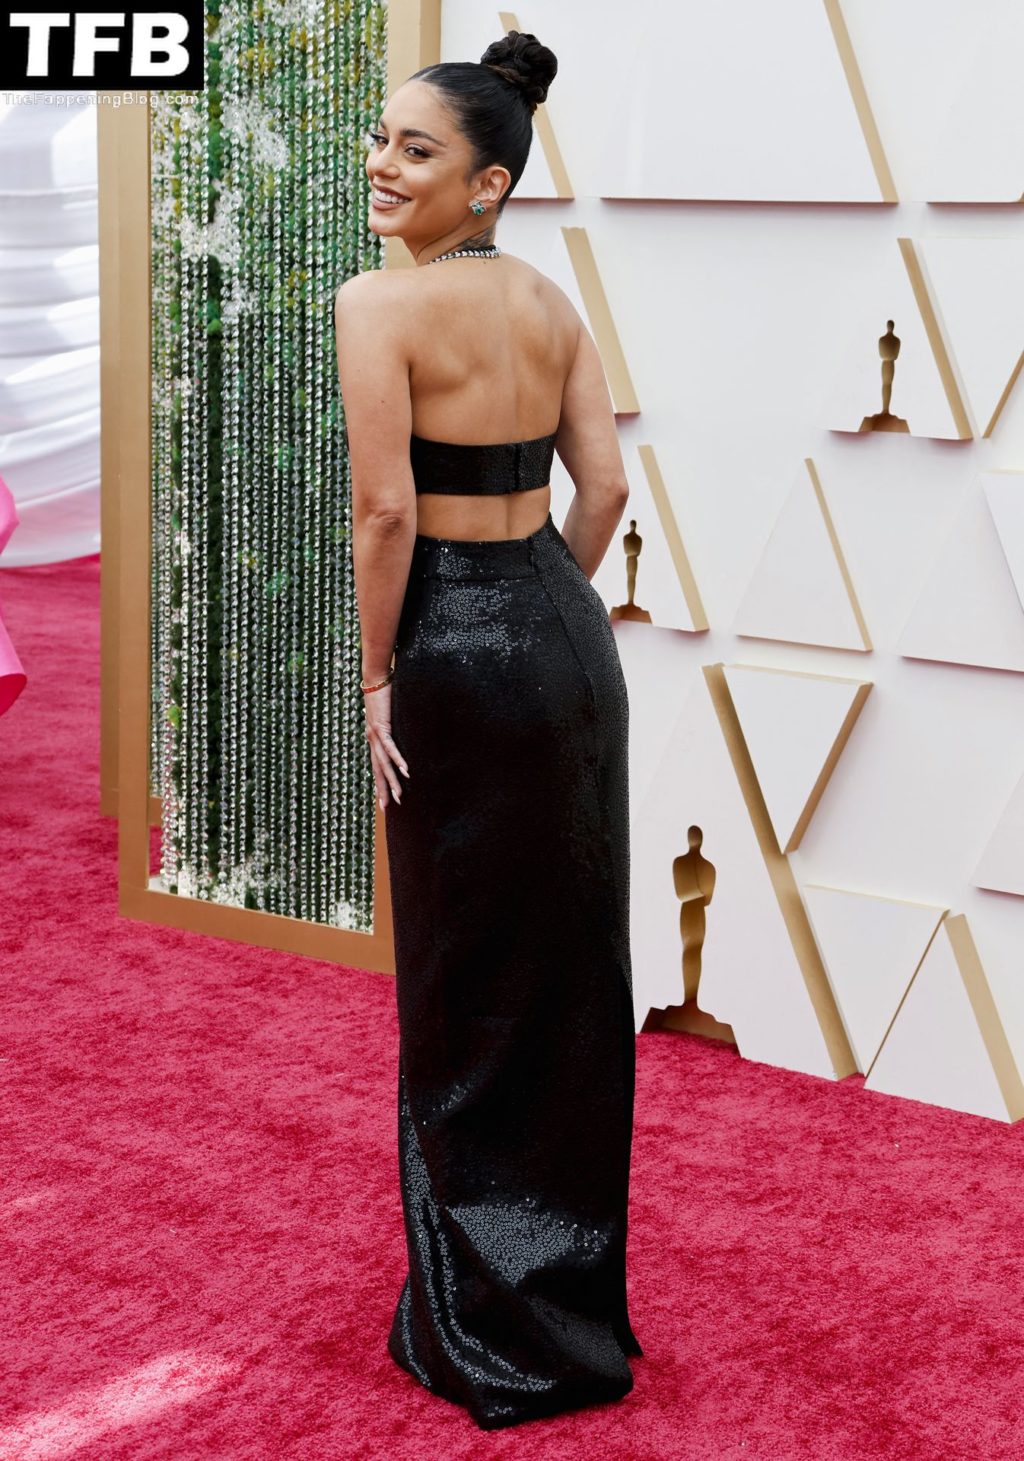 Vanessa Hudgens Sexy The Fappening Blog 8 4 1024x1461 - Vanessa Hudgens Poses on the Red Carpet at the 94th Annual Academy Awards (83 Photos)